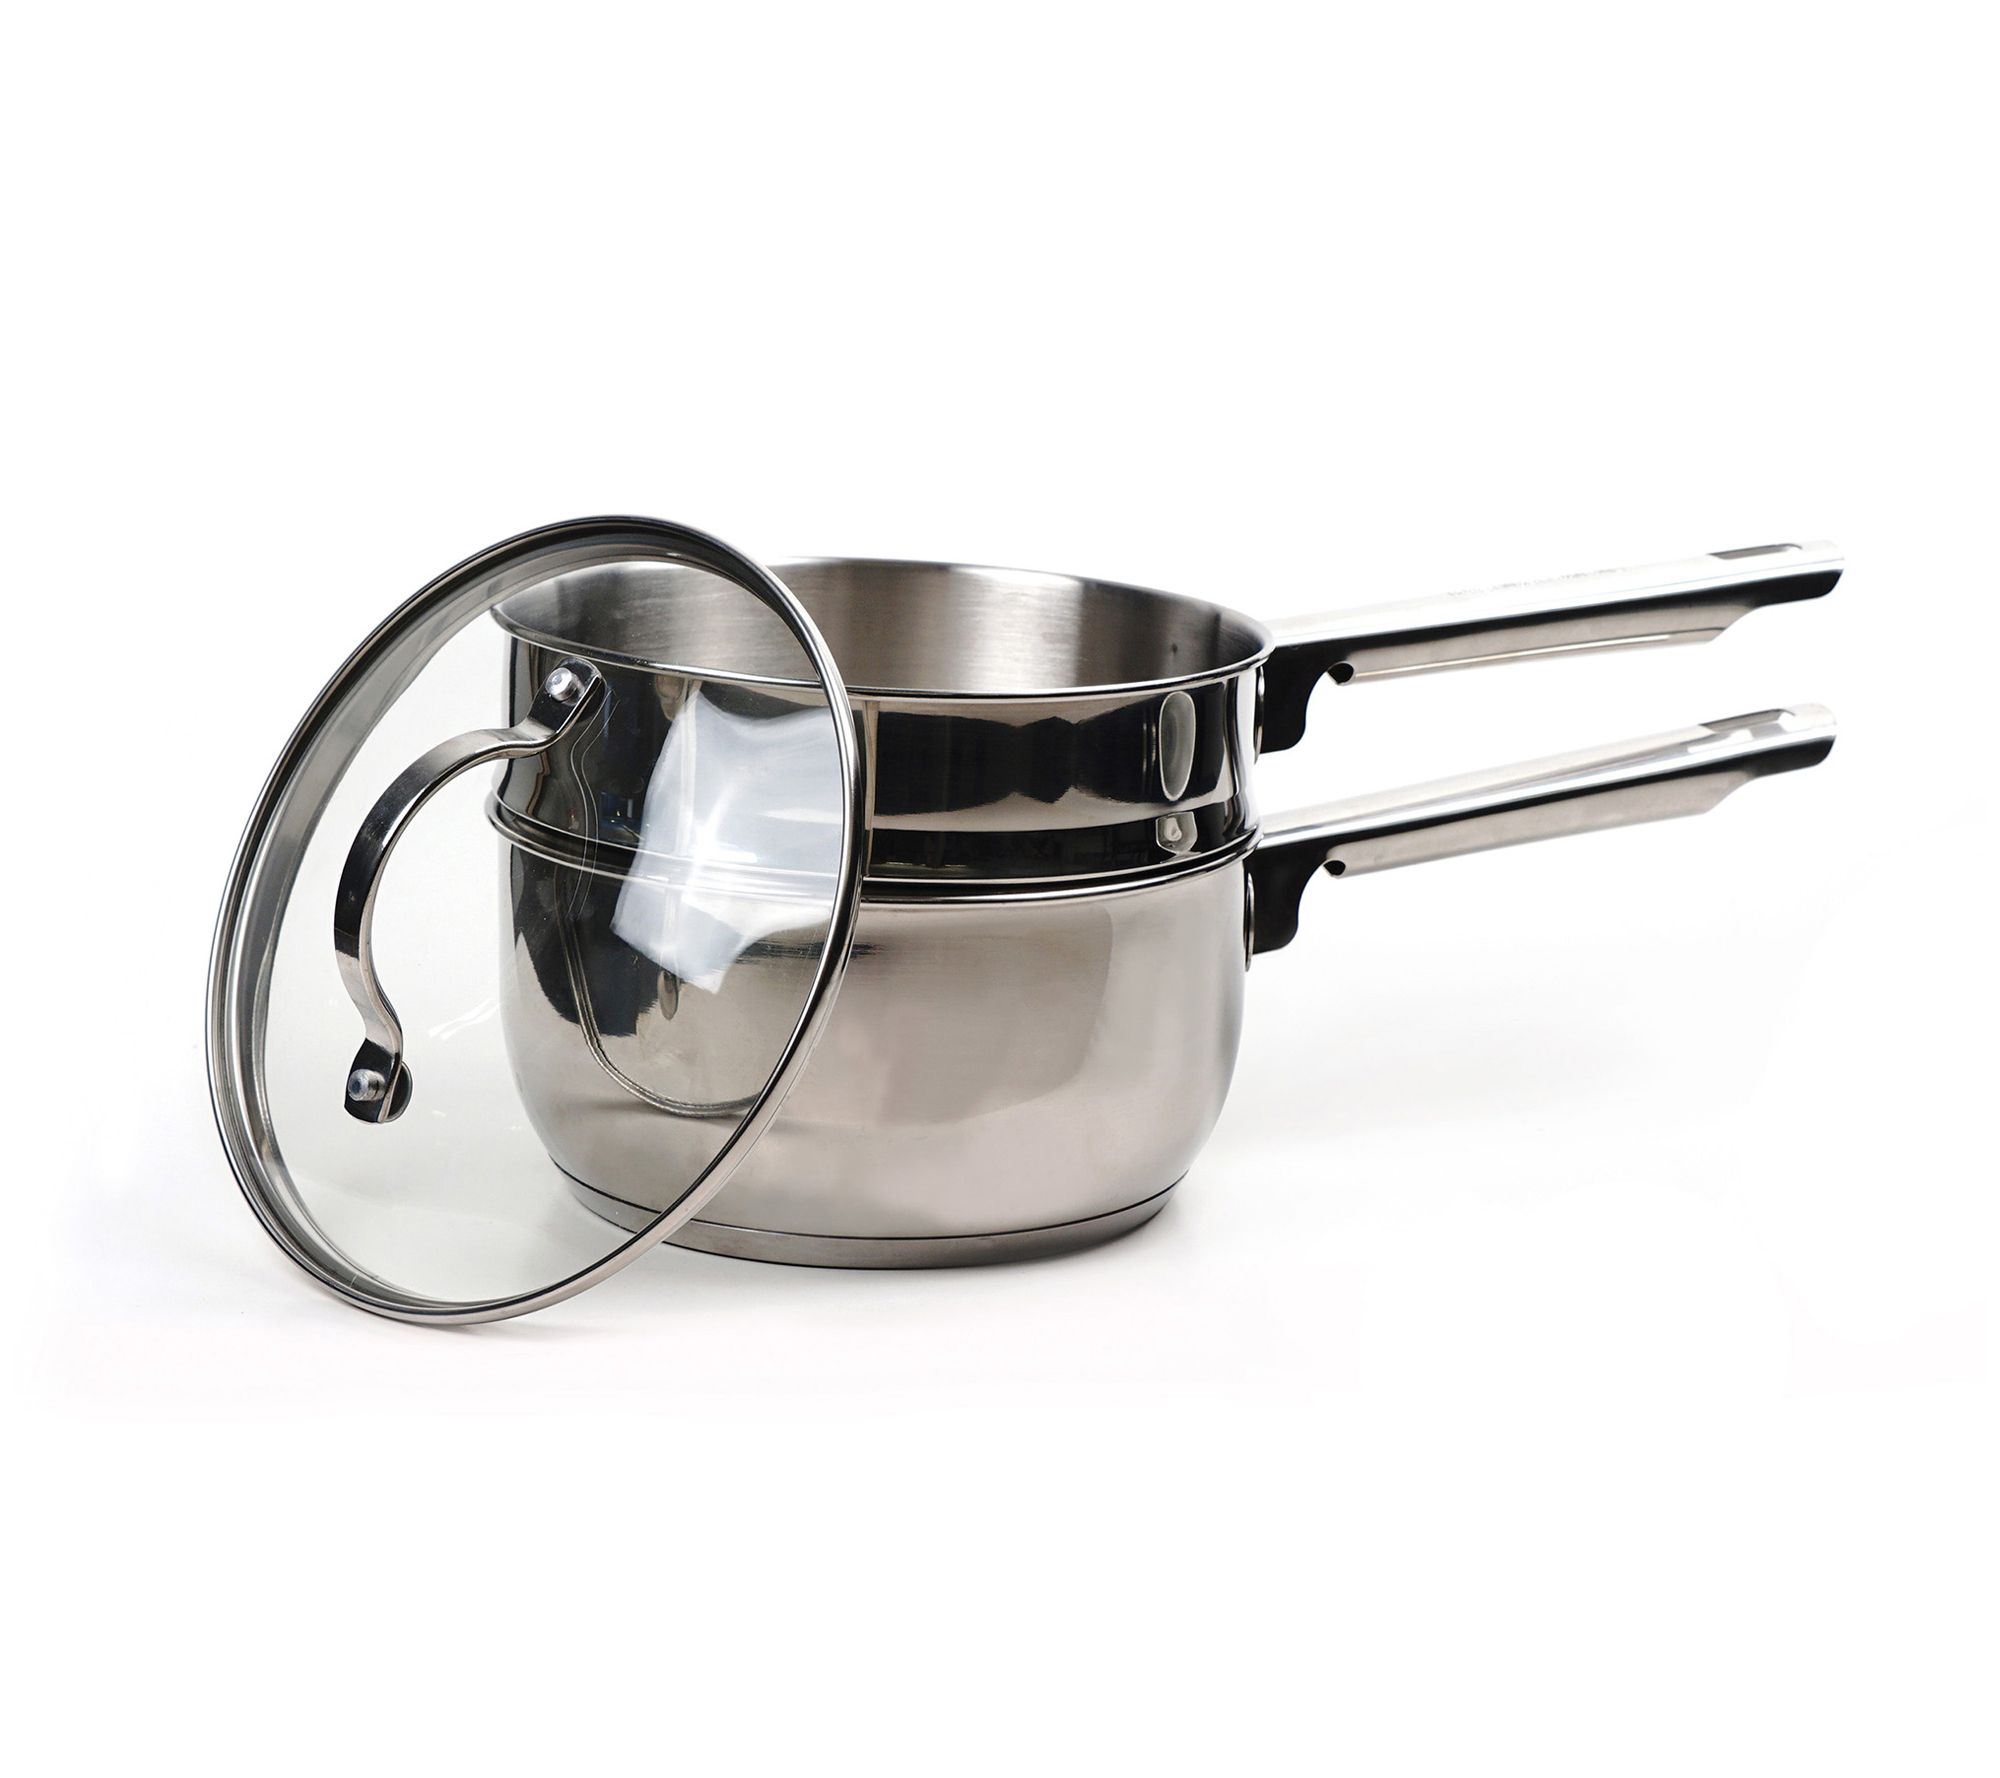 Classic Cuisine Stainless Steel 6 Cup Double Boiler